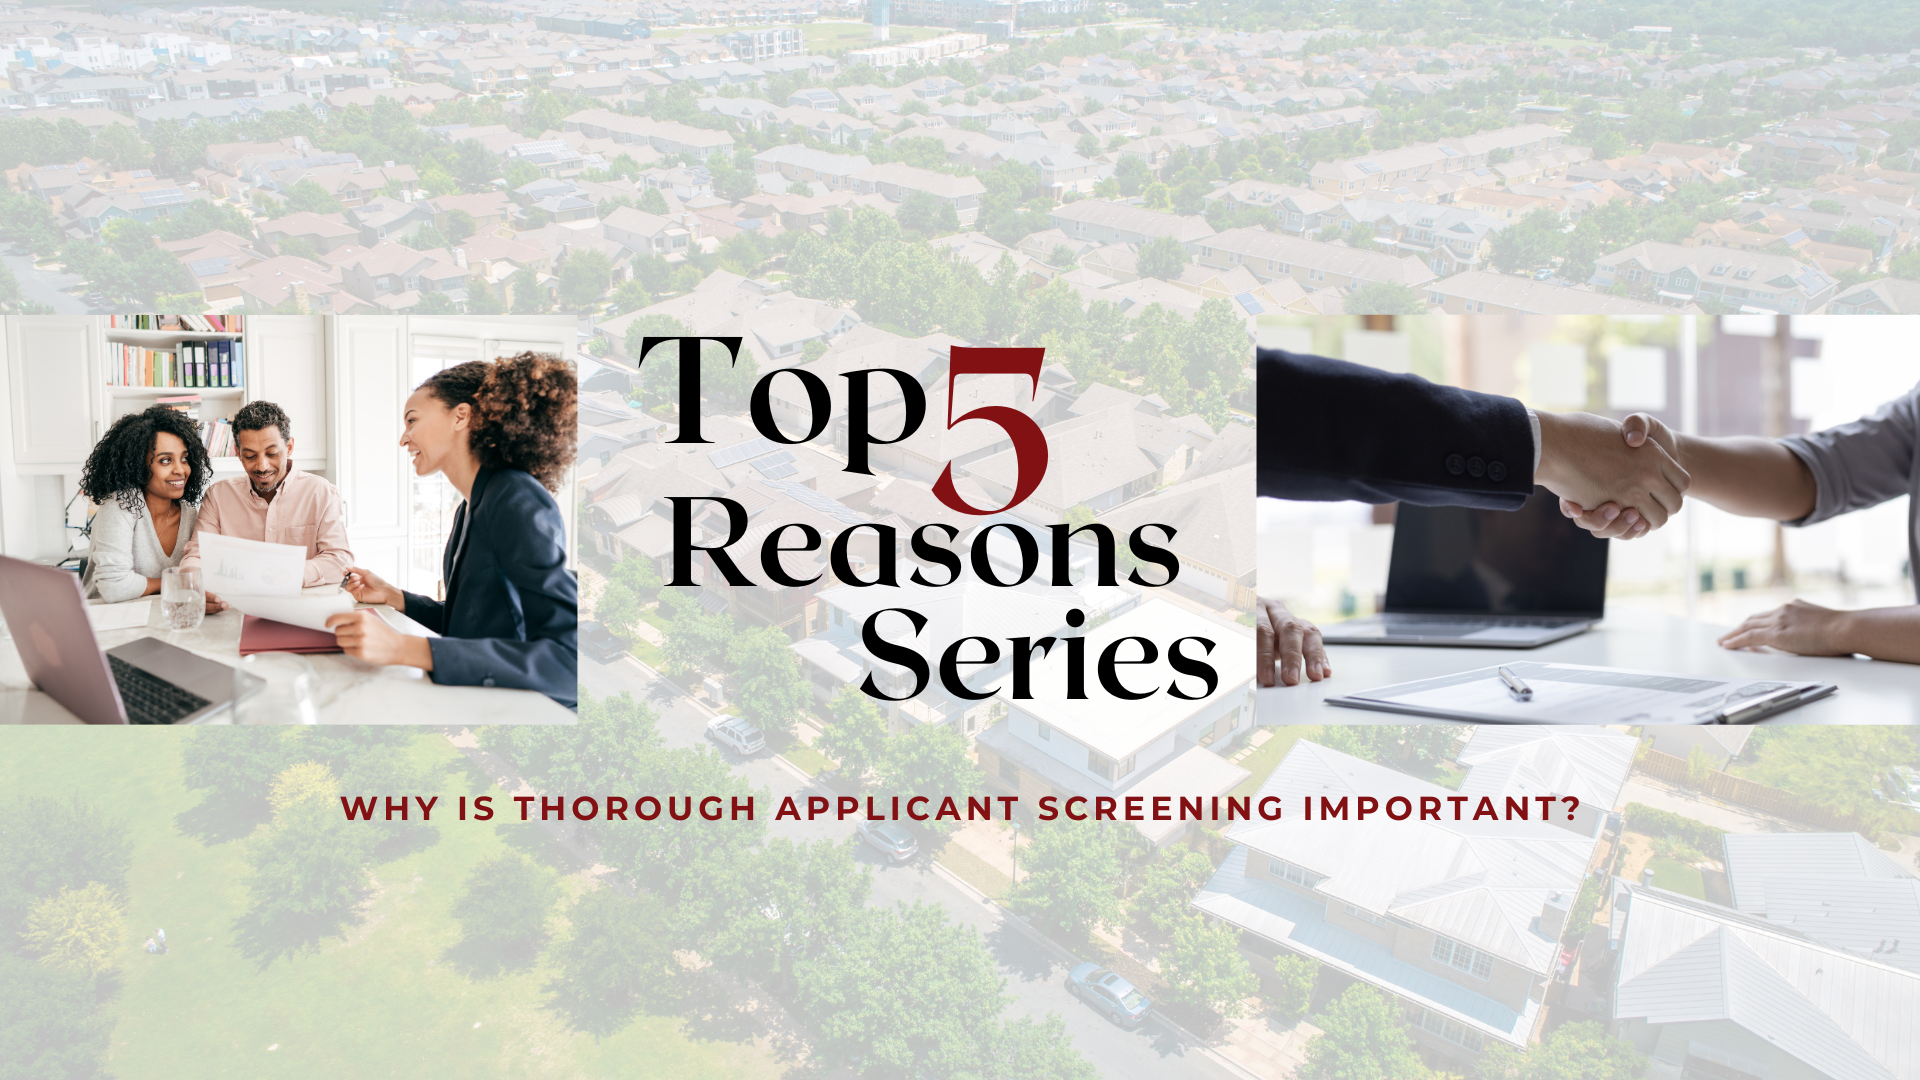 Top 5 Reasons Series: Why Is Thorough Applicant Screening Important?